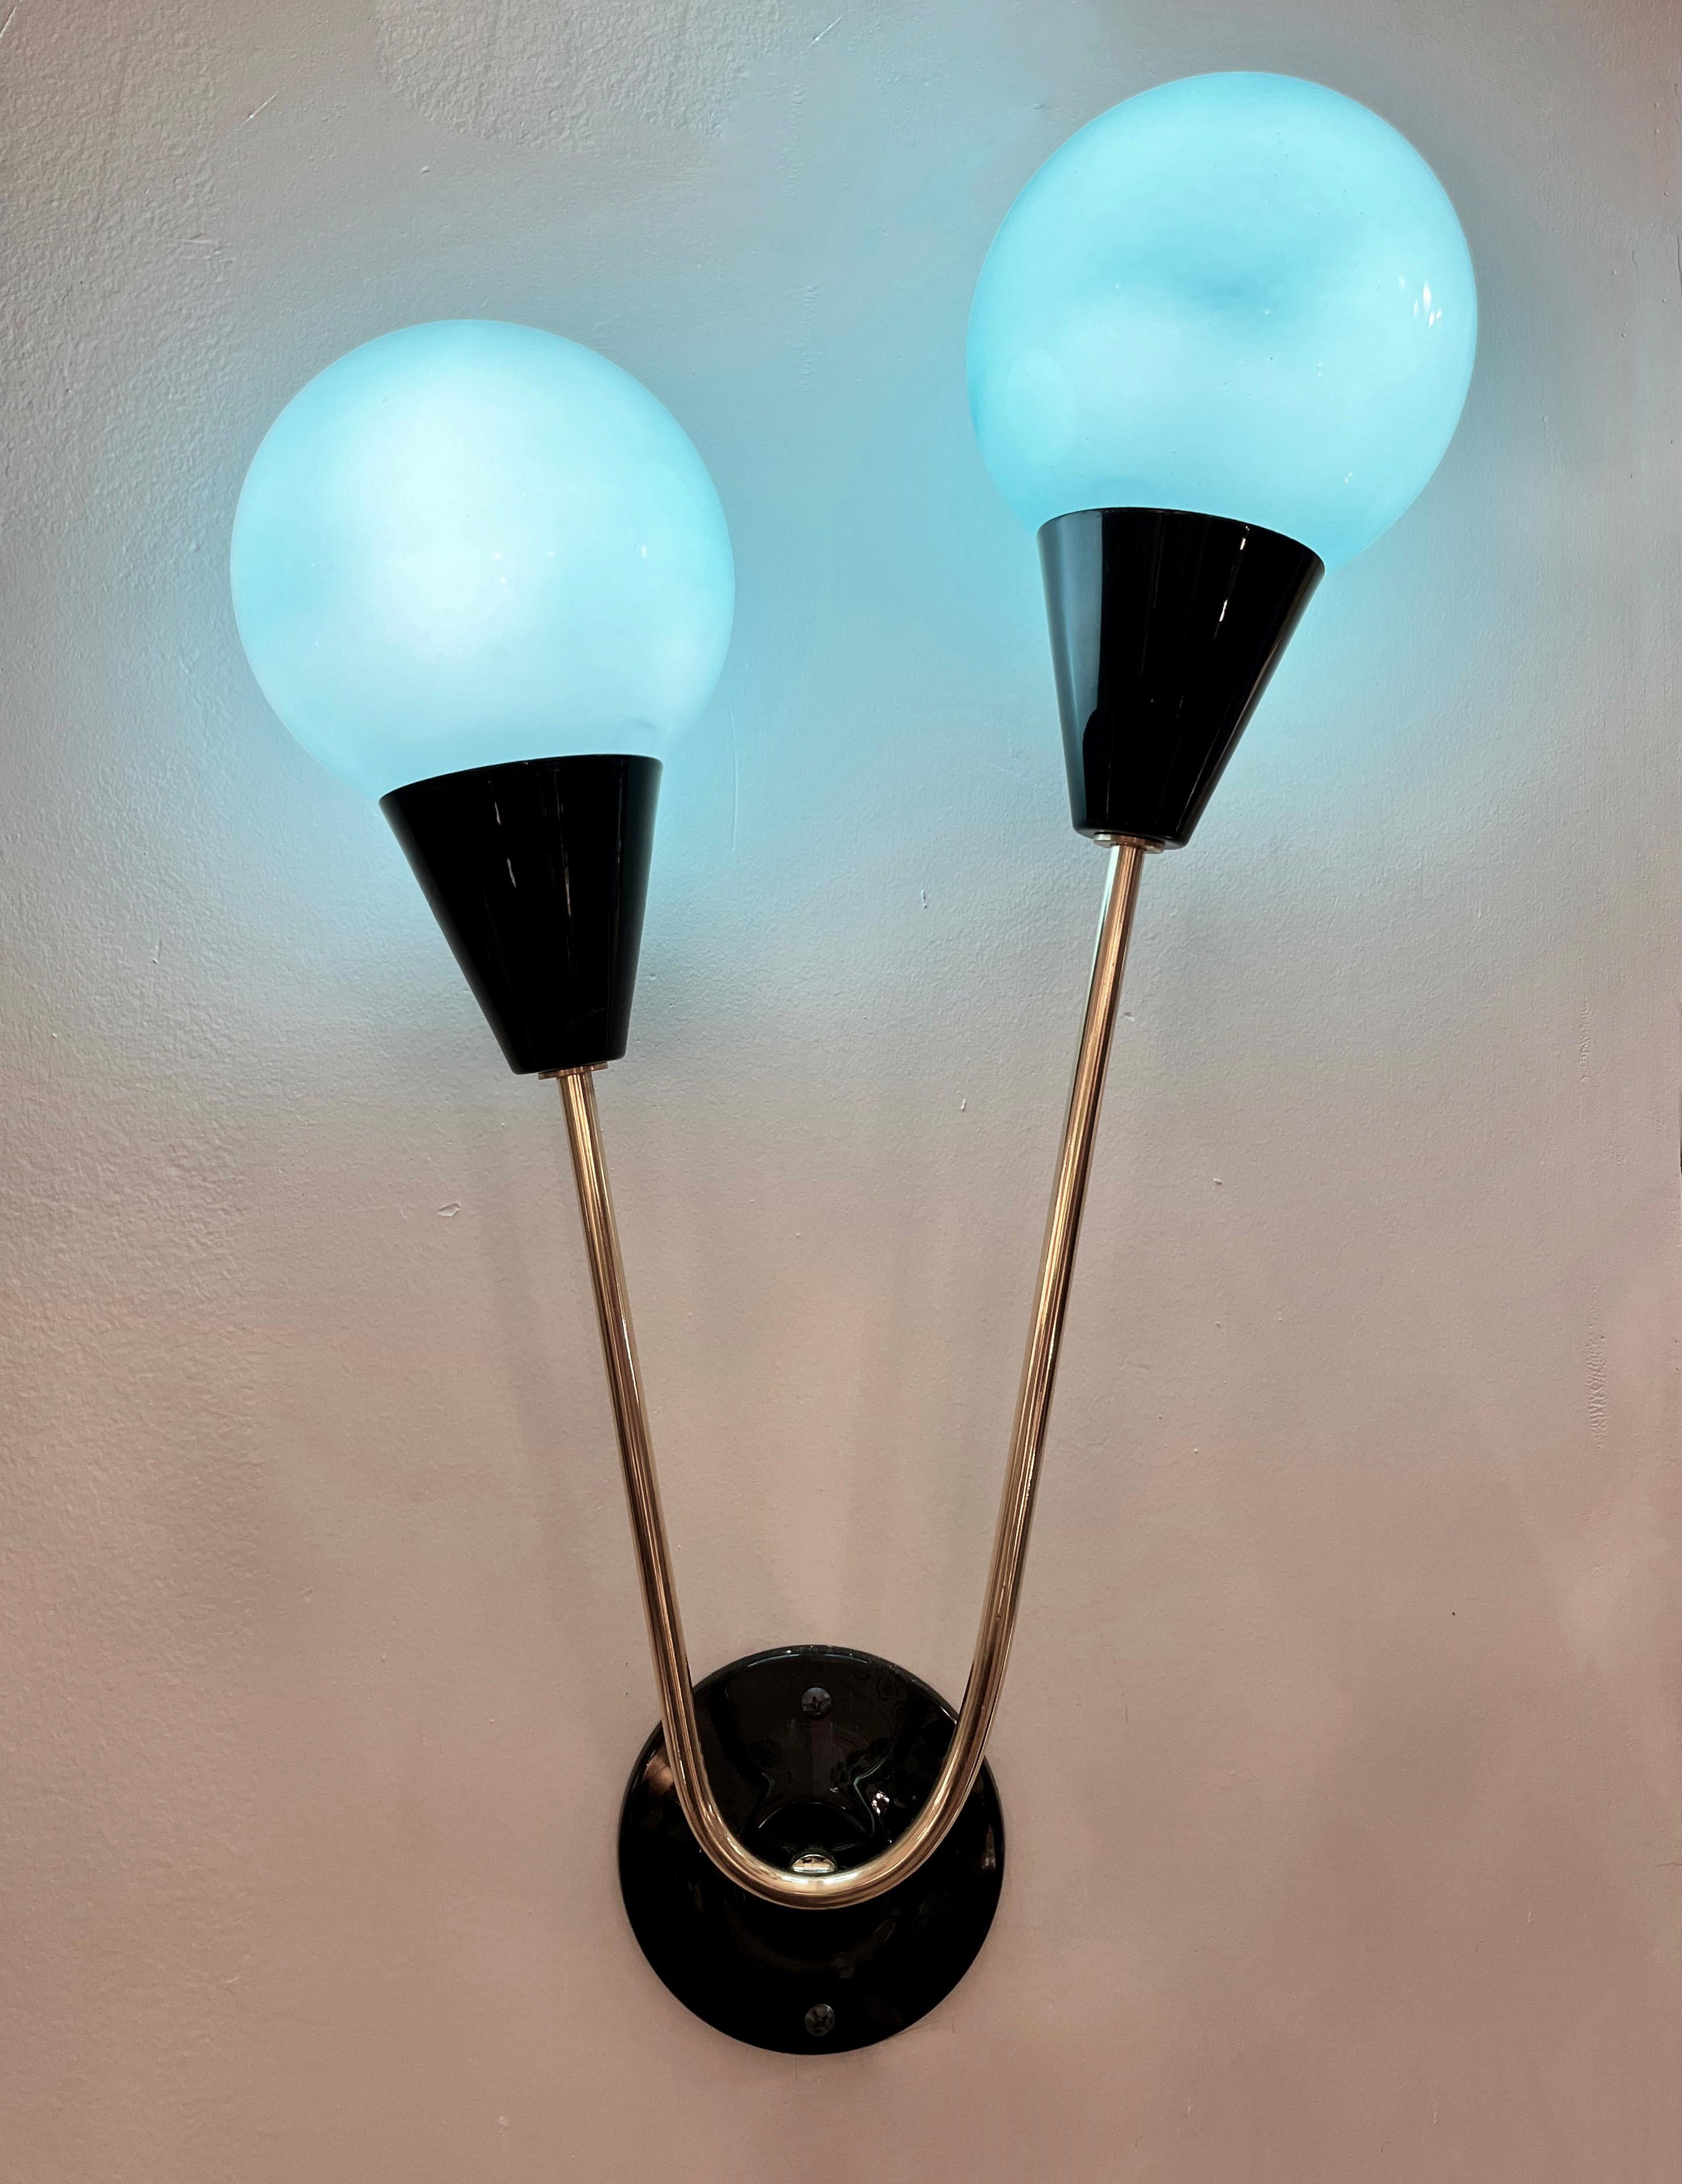 Contemporary Mid-Century Modern wall lights with Stilnovo inspiration, entirely handcrafted in Italy, with aquamarine ocean blue glass shades that are overlaid in white glass to produce plenty of glowing light when lit. The handmade round backplate